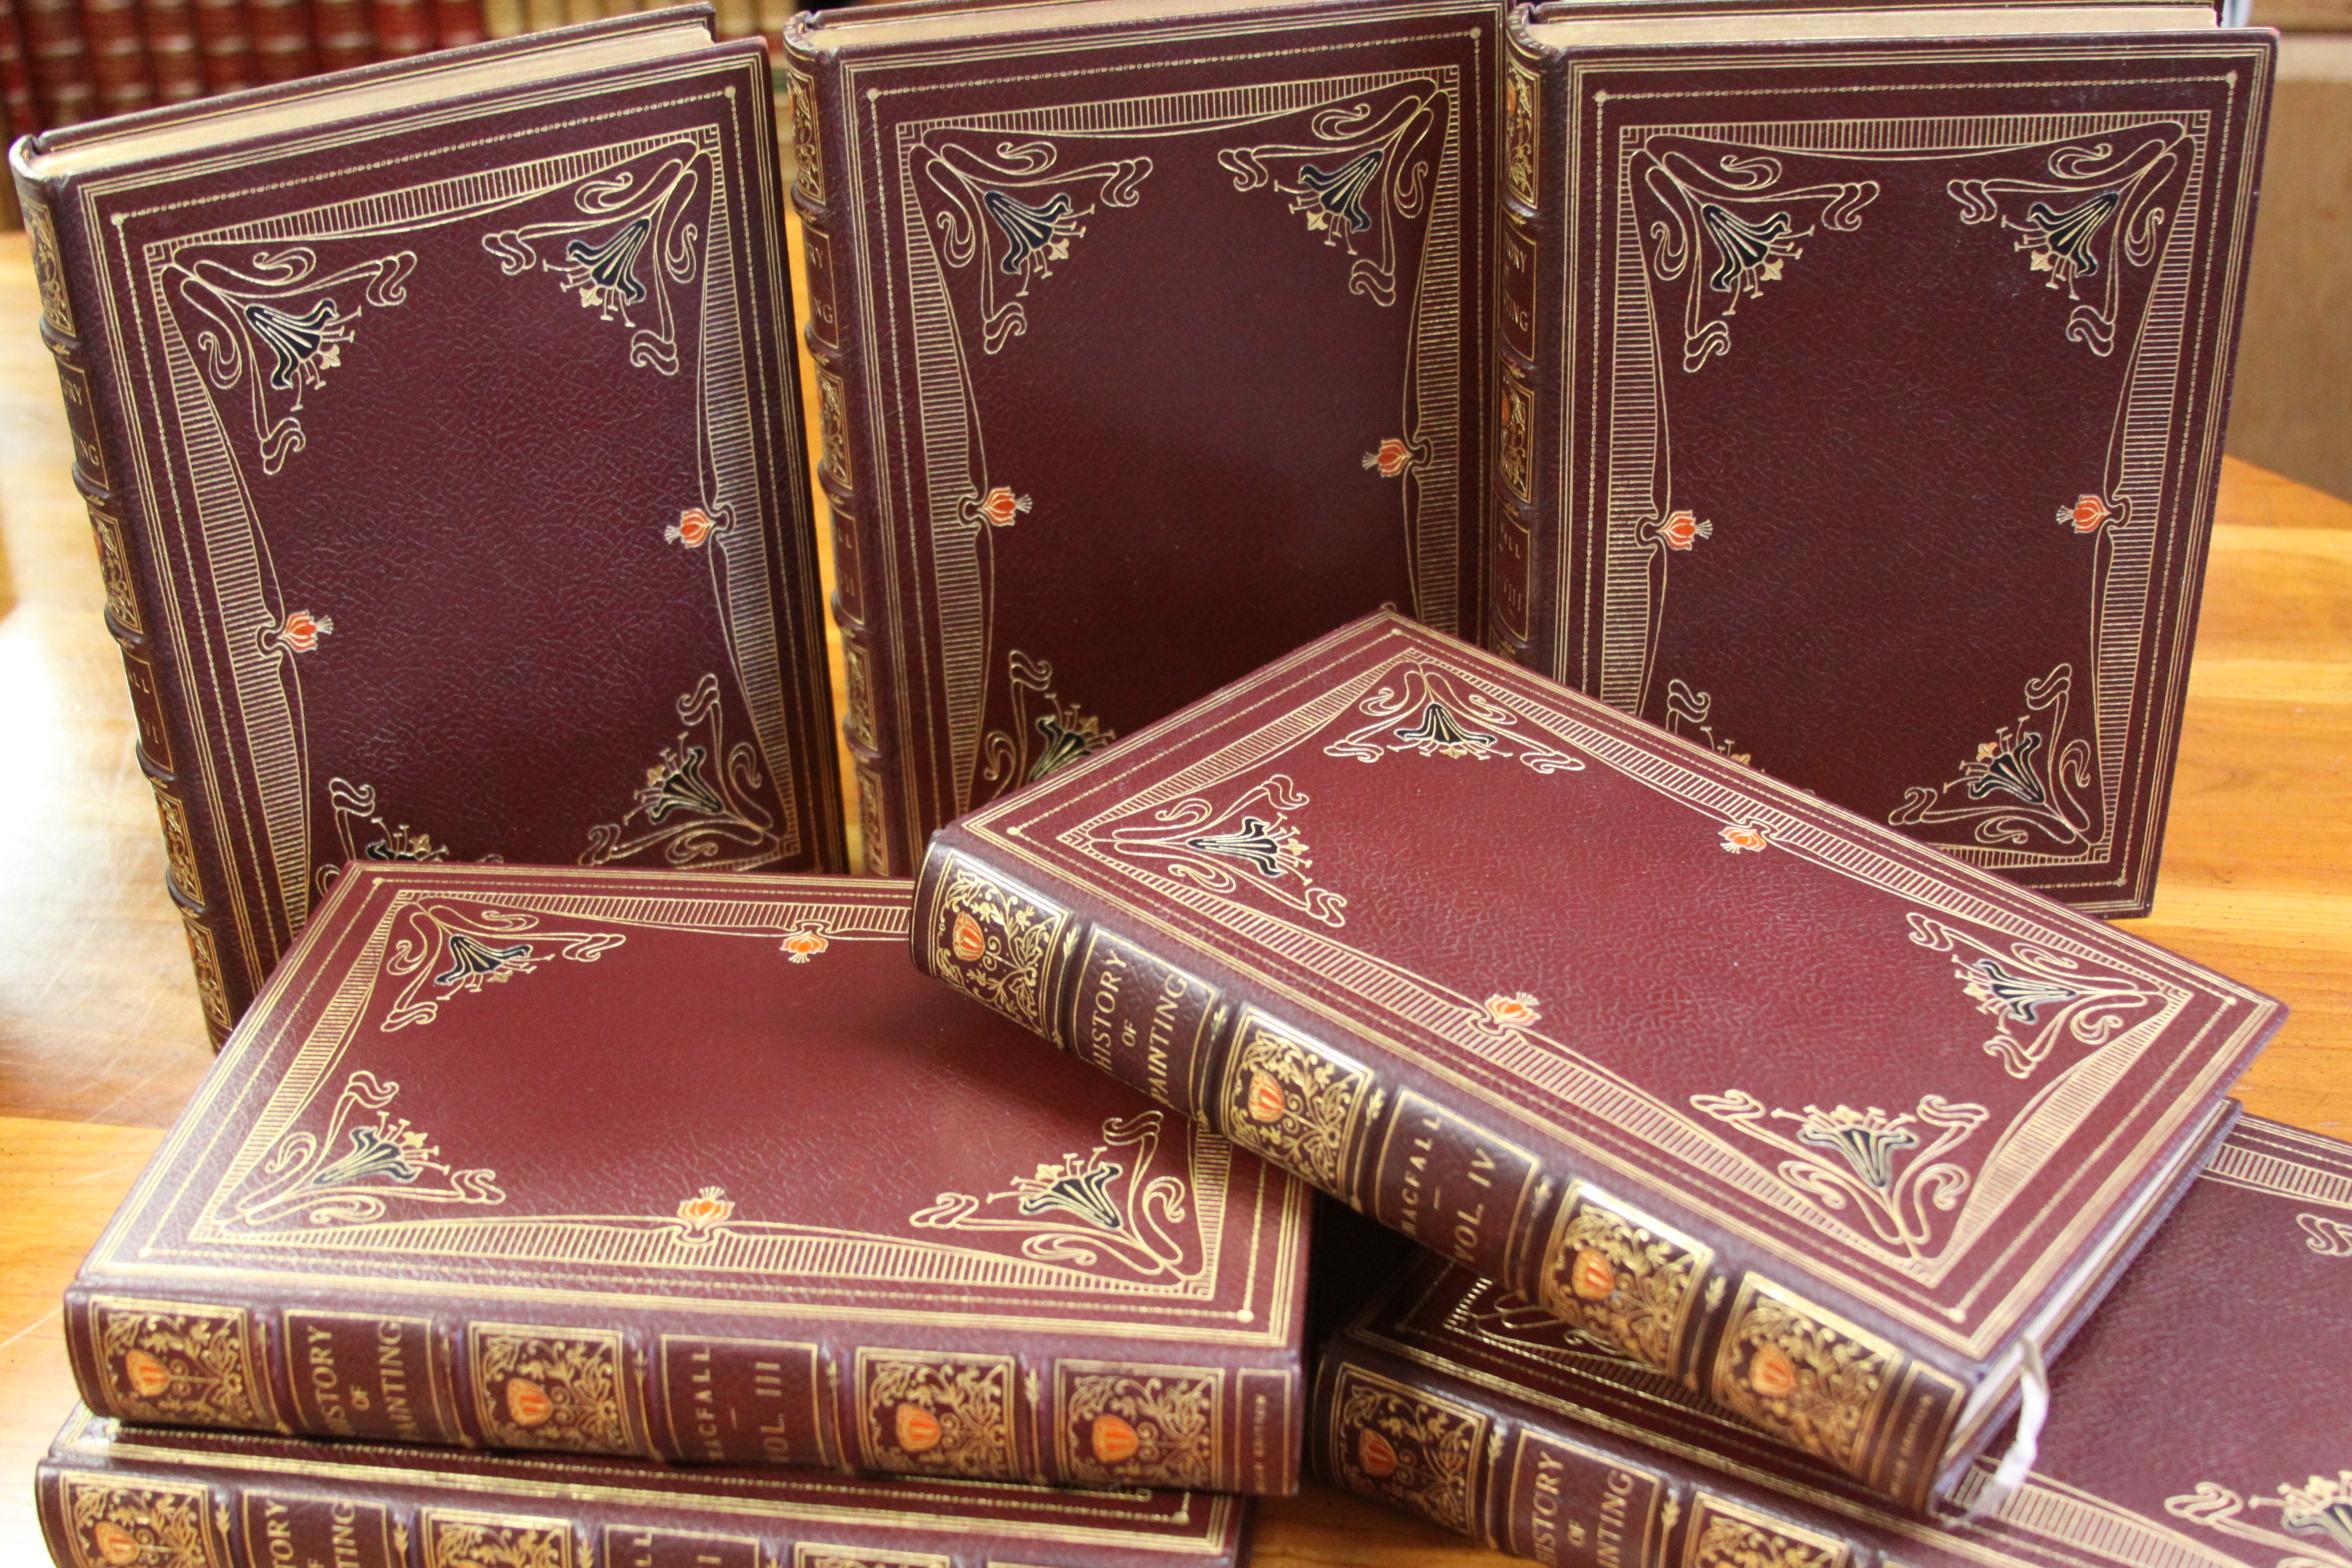 Books, a History of Painting, Antique Leather-Bound Collections 10